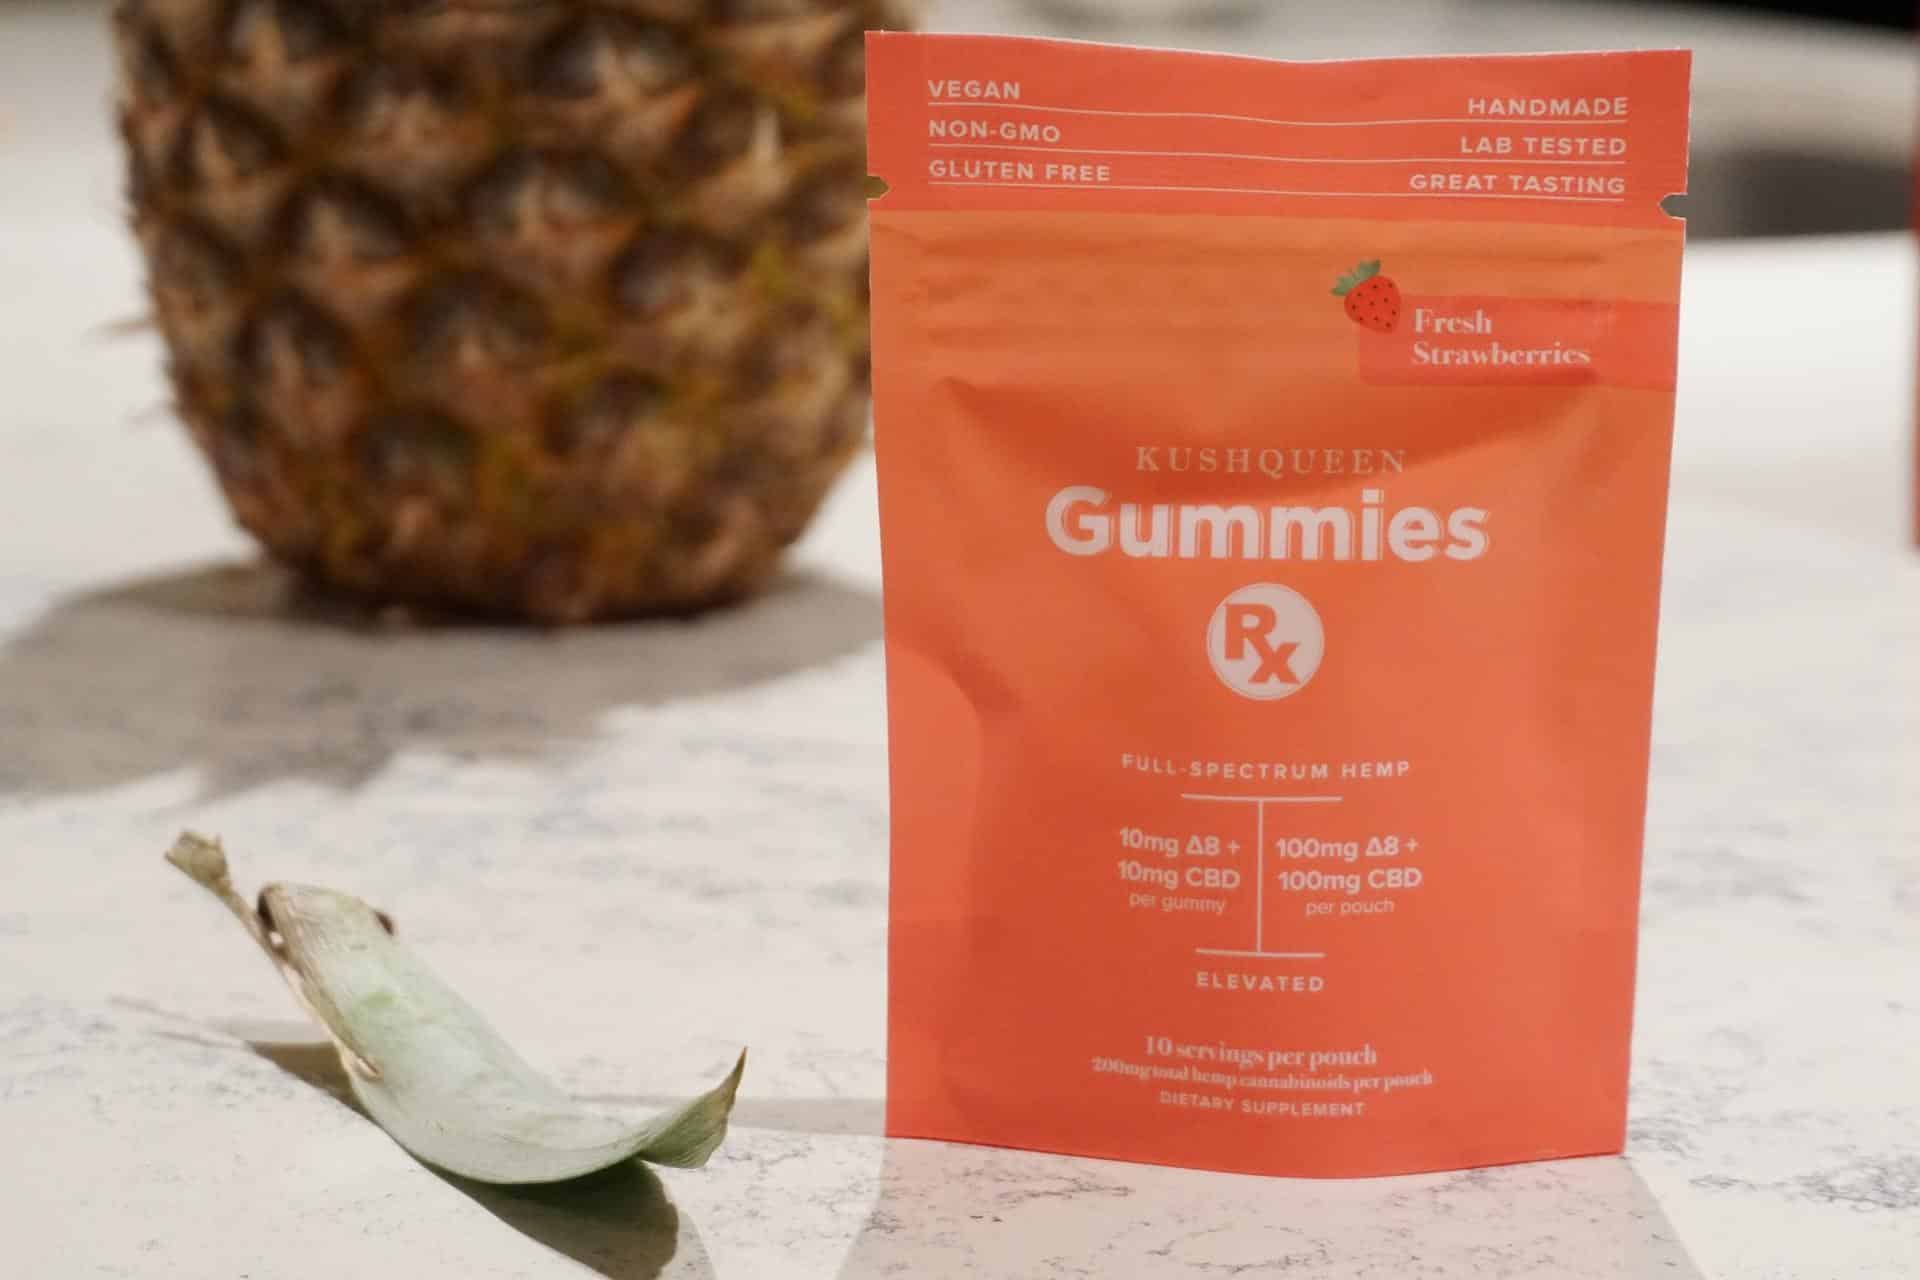 What are CBD gummies and what are they used for?